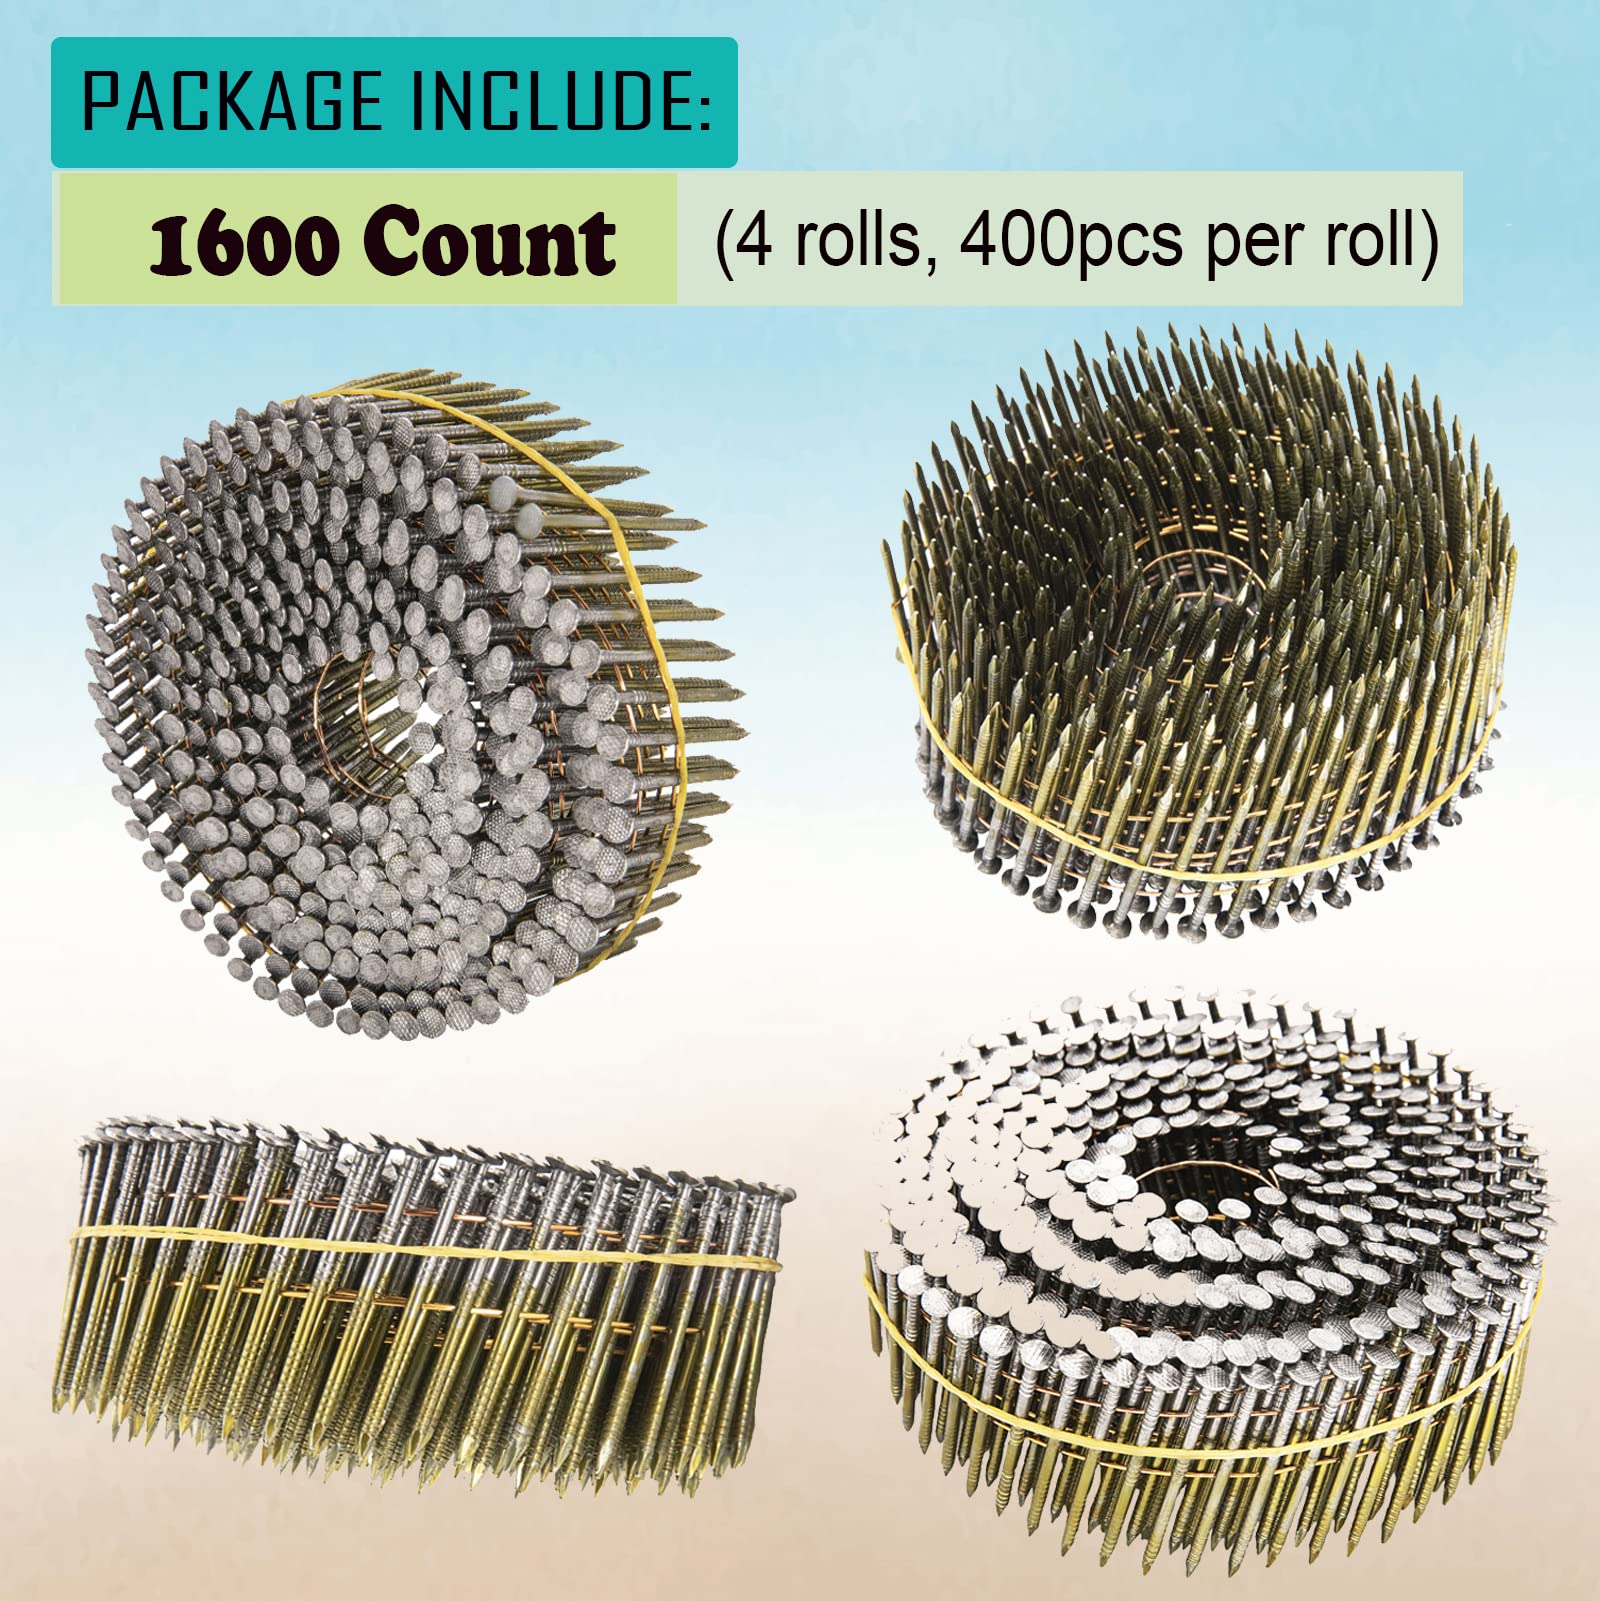 Siding Nails 1-1/4-Inch x .092-Inch, 15-Degree Collated Wire Coil, Full RoundHead, Ring Shank, Hot-Dipped Galvanized, 1600 Count for Rough Nailing of Lathing and Sheathing Materials by BOOTOP